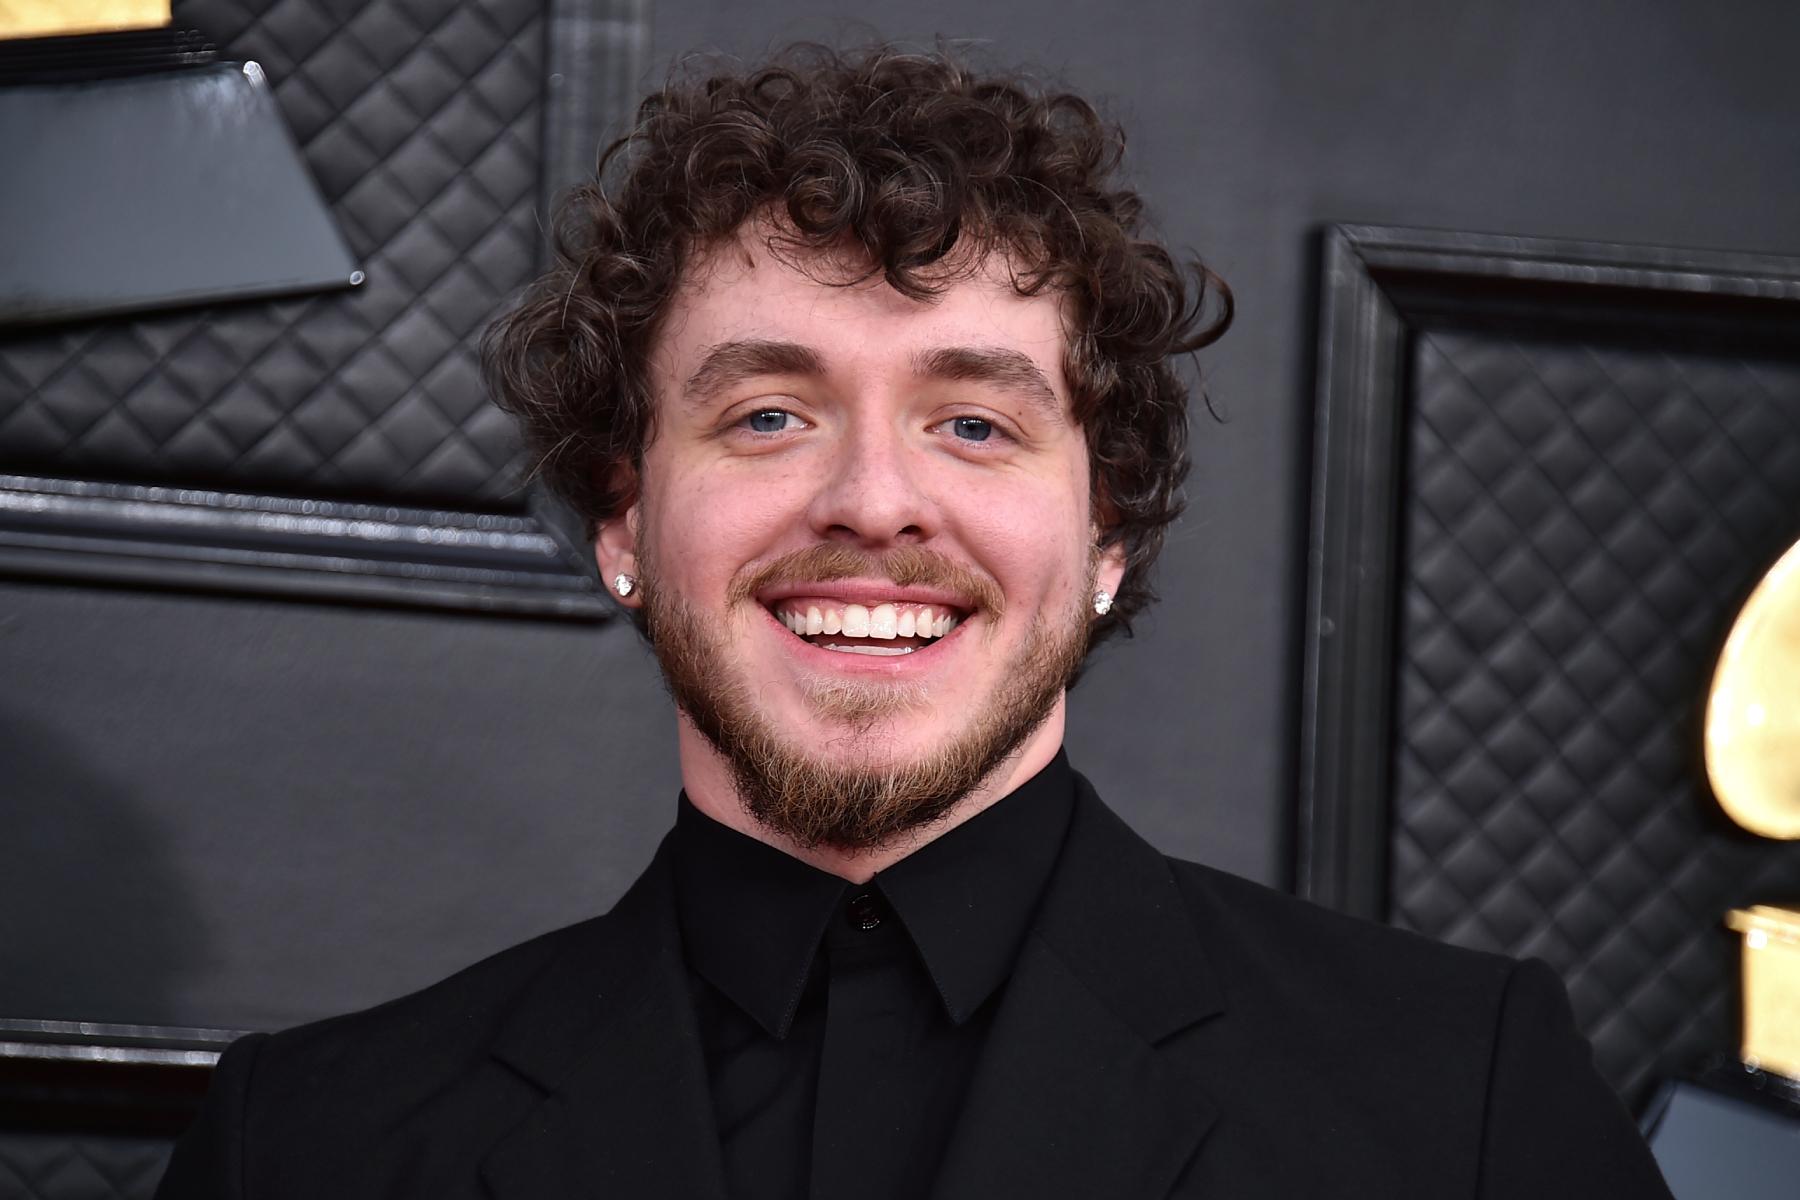 Jack Harlow arrives at the 64th Annual Grammy Awards at the MGM Grand Garden Arena on Sunday, April 3, 2022, in Las Vegas.